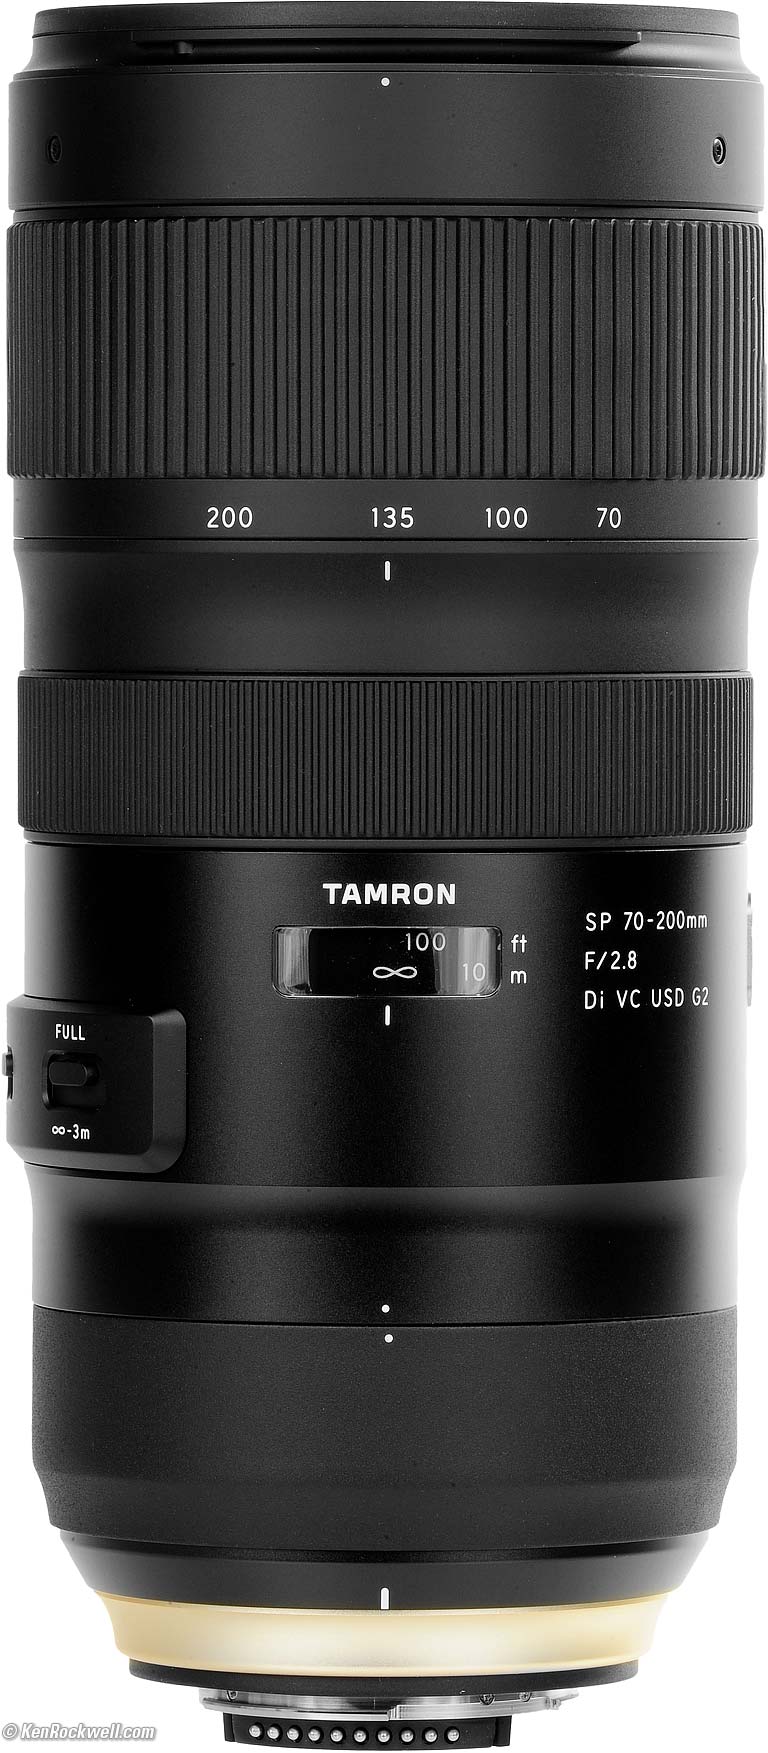 Tamron SP 70-200mm f/2.8 VC G2 Review